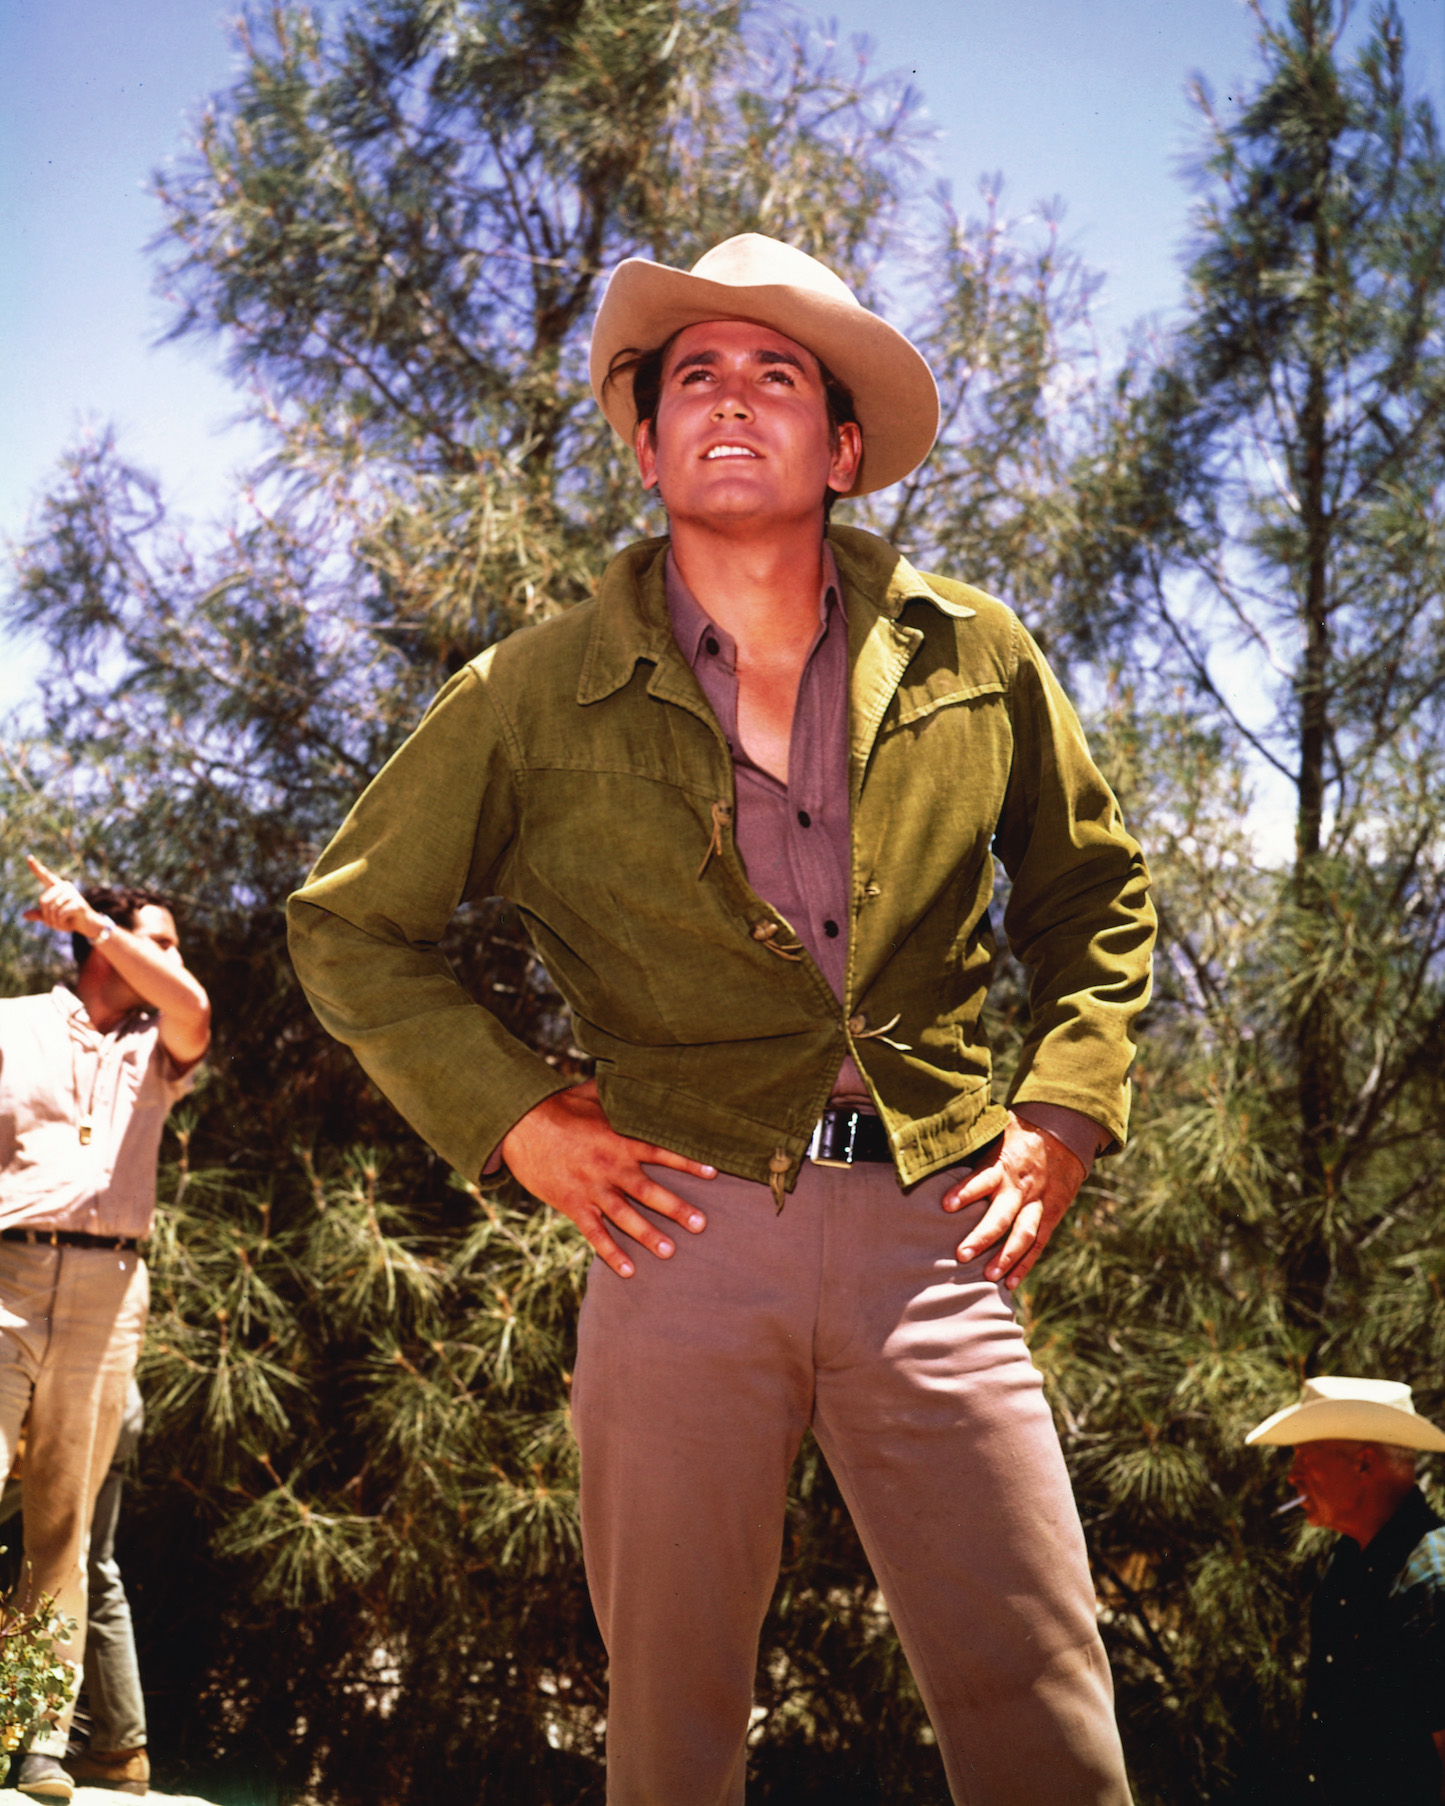 Michael Landon with his hands on his hips on 'Bonanza'